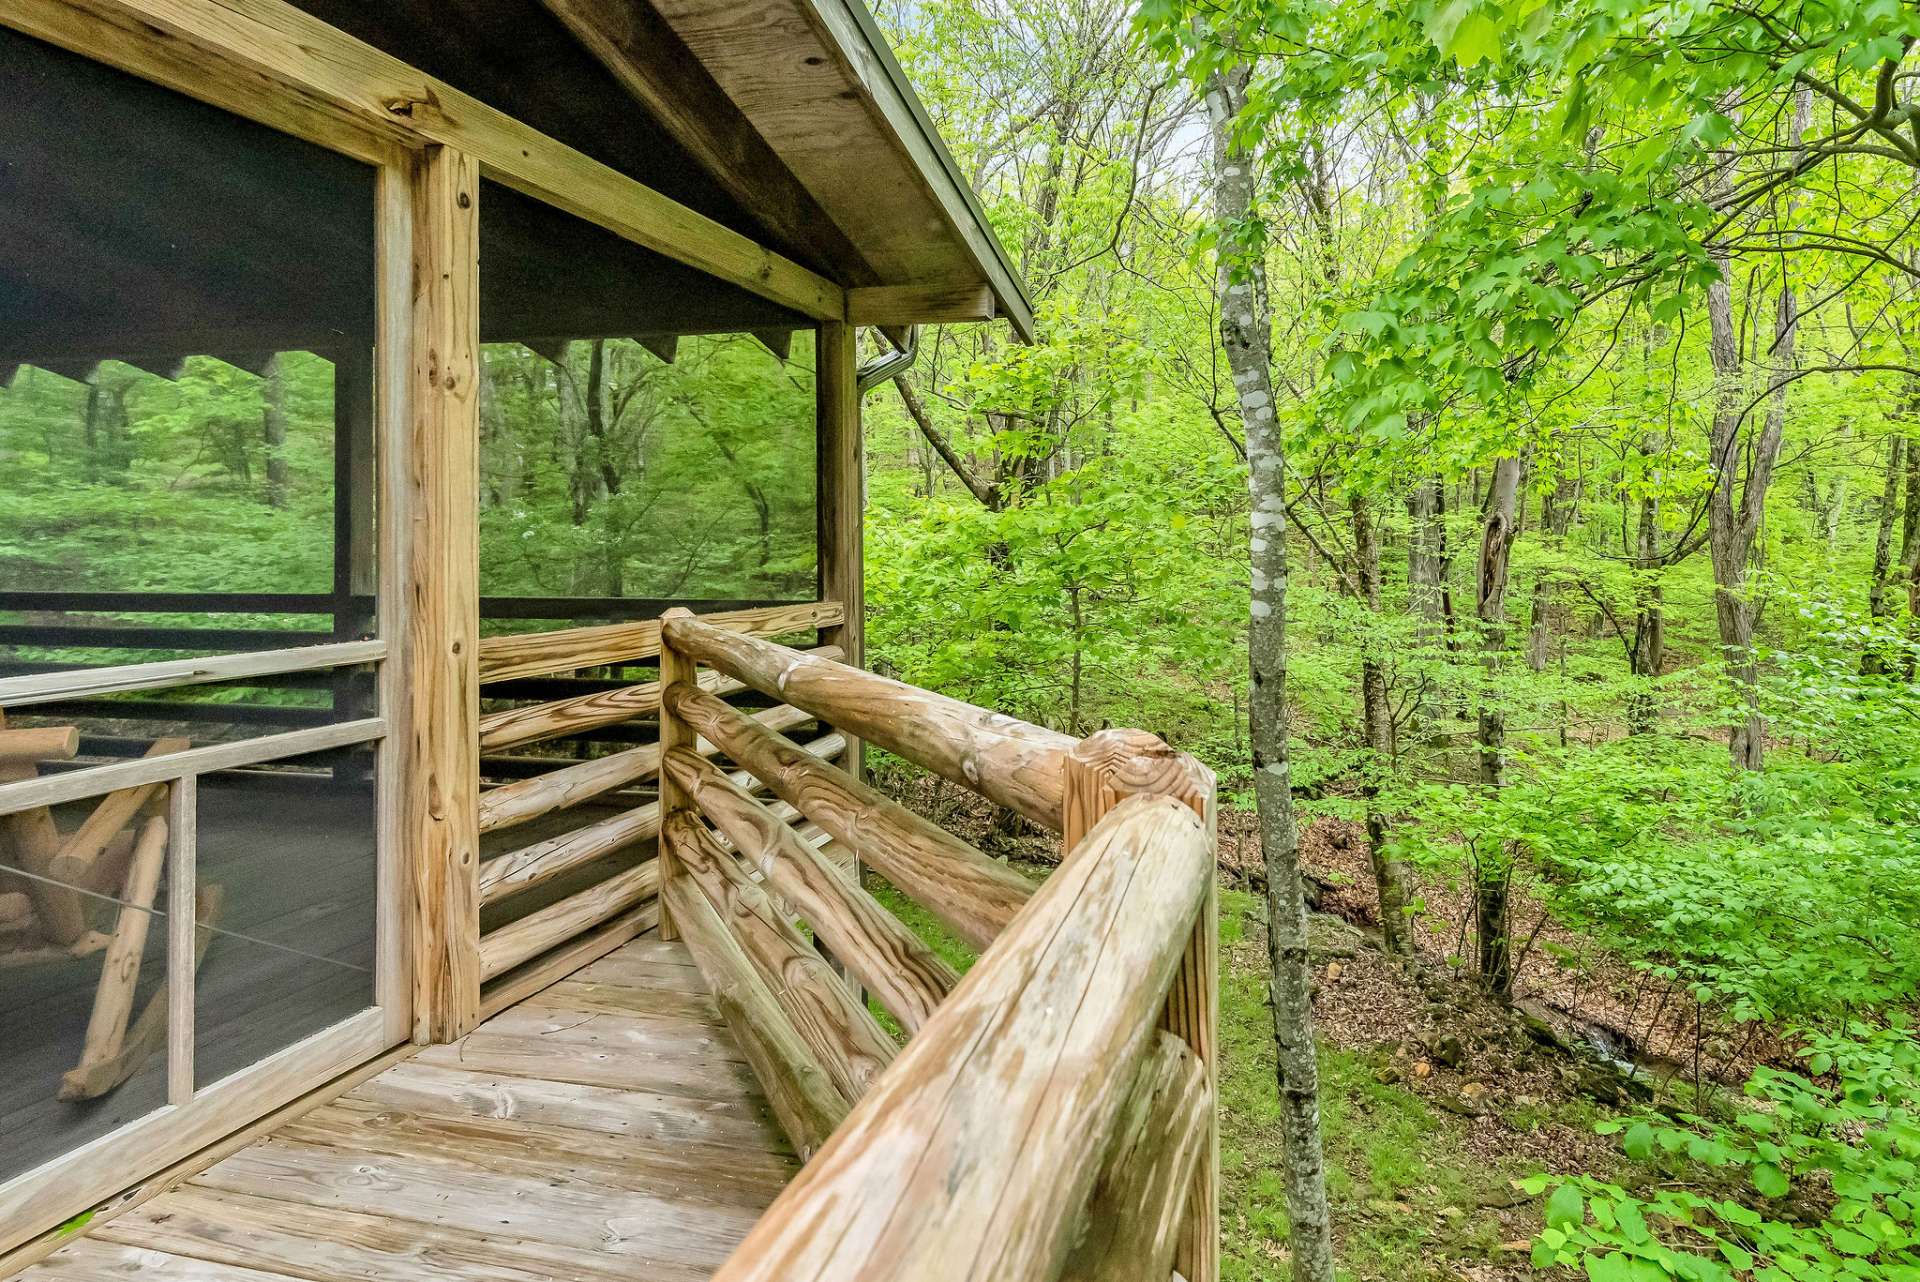 back screened porch where you can savor early mornings listening to the birds or unwind in the late evenings to the soothing sounds of crickets.